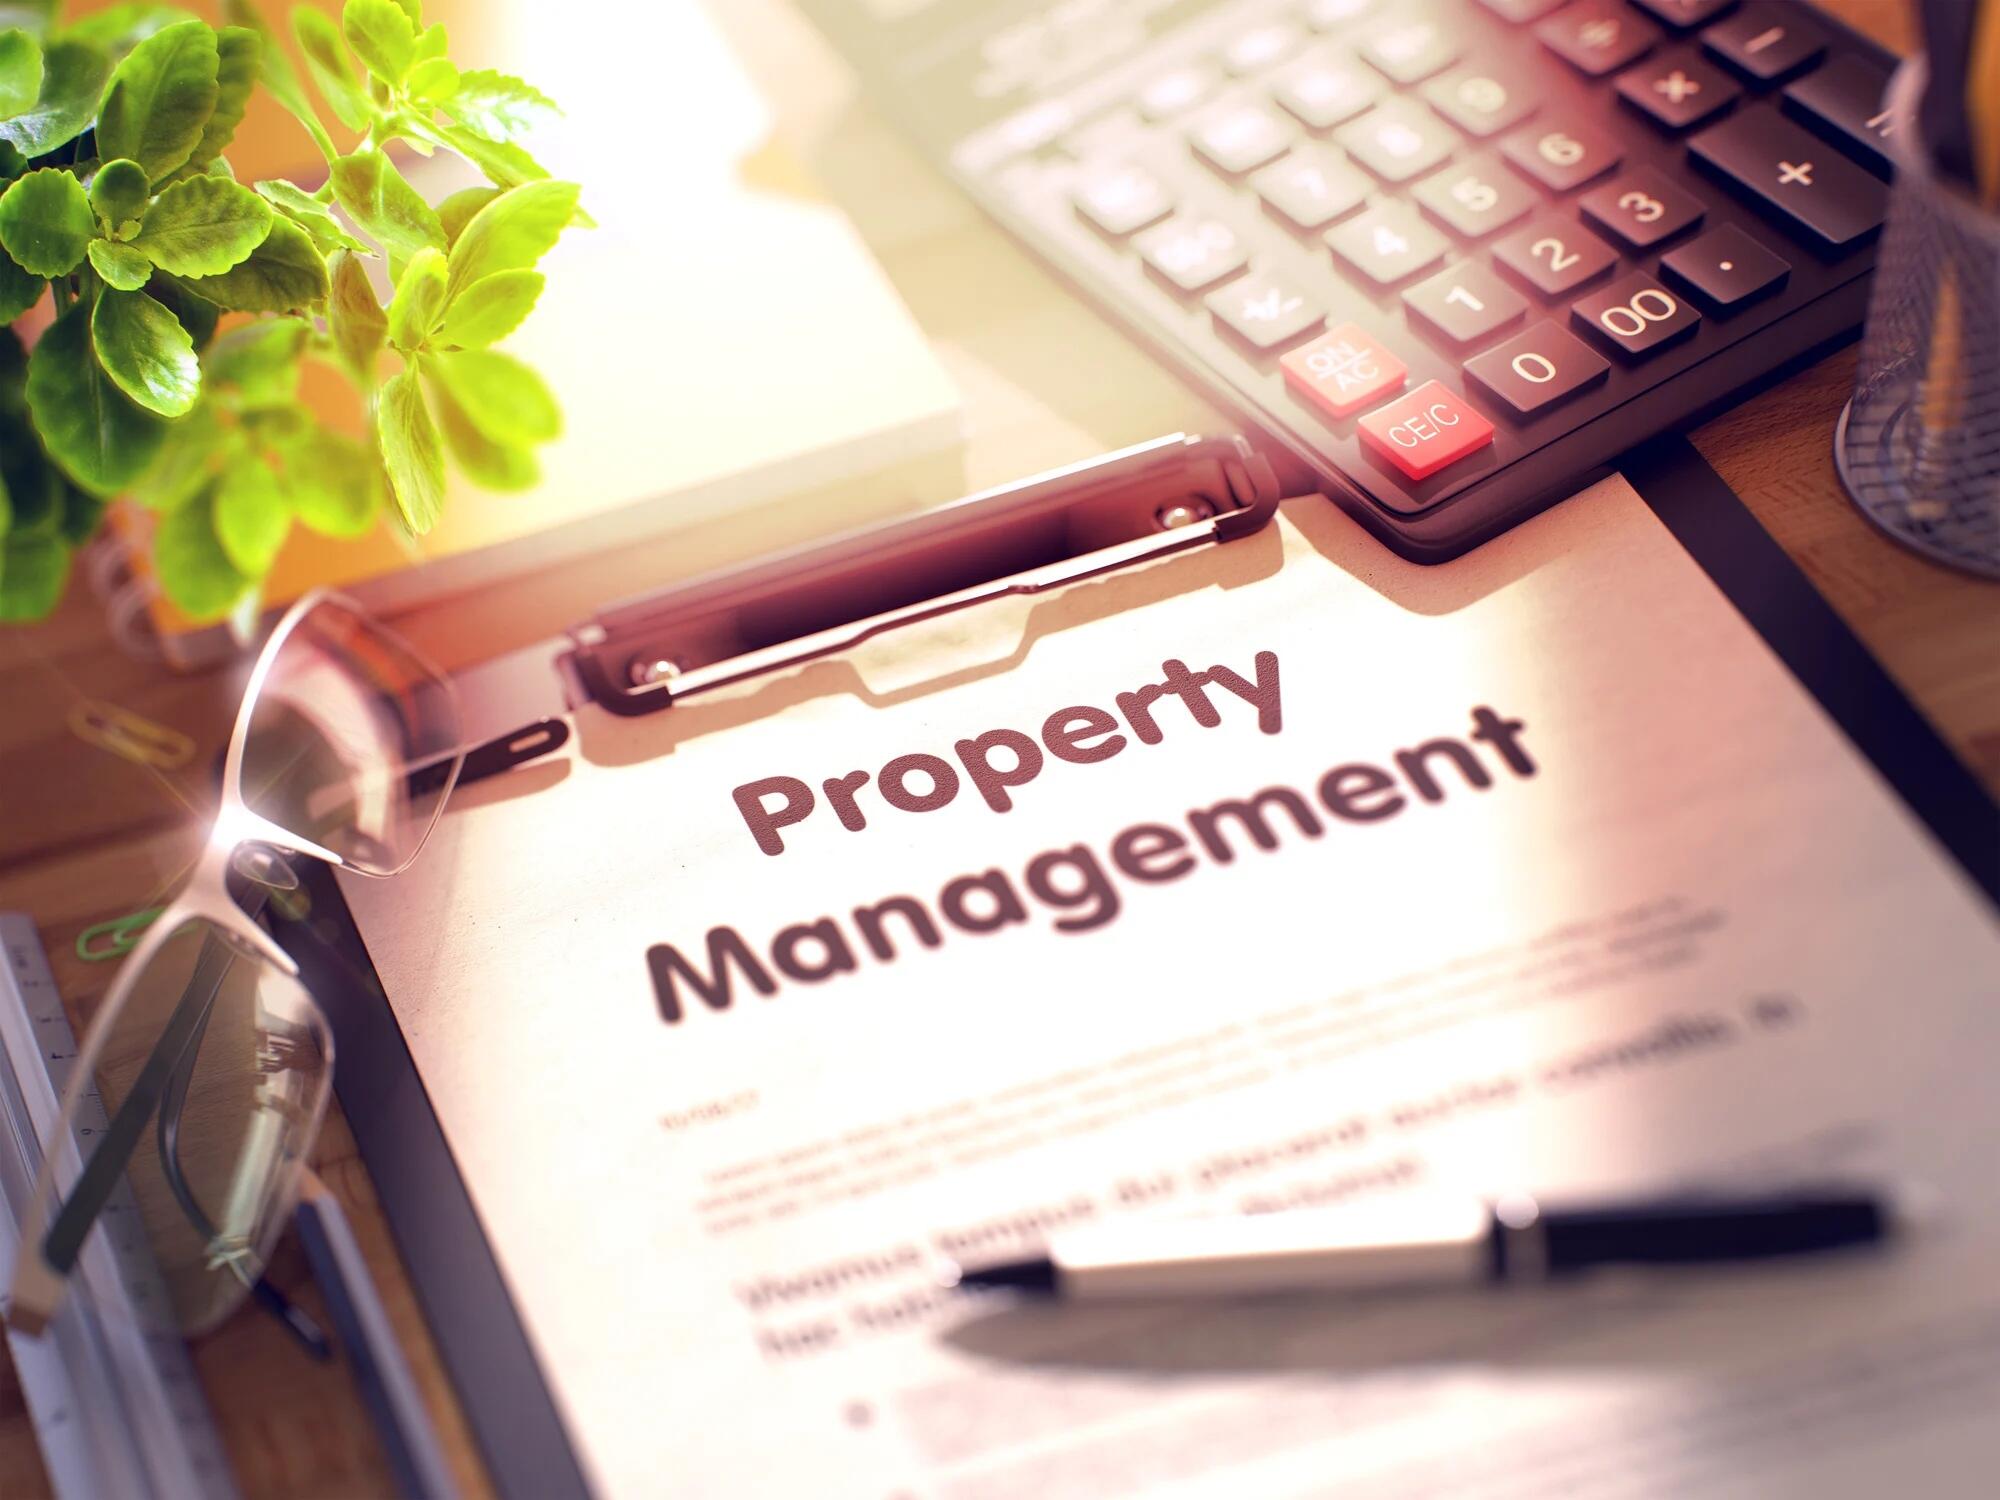 How Much Does Property Management Cost?